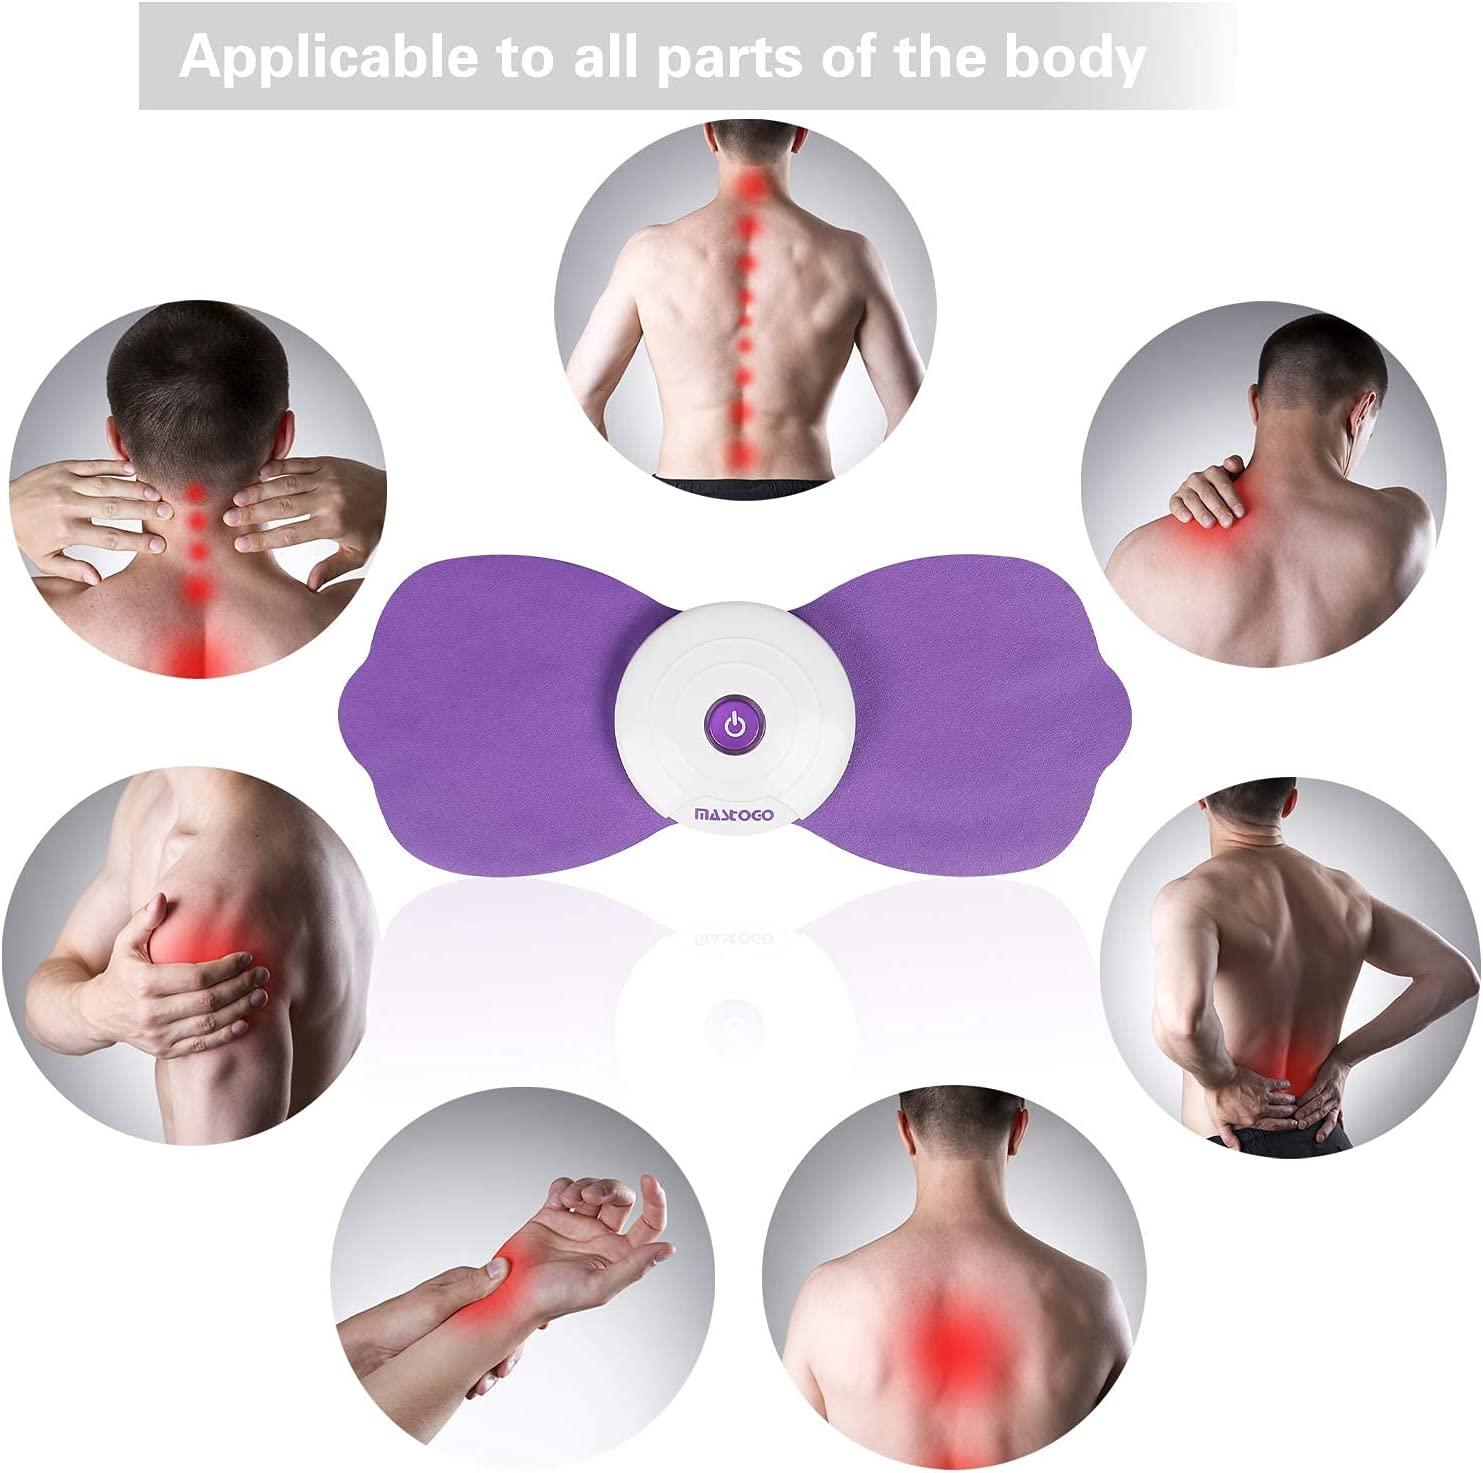 100% New Tens Unit Back Pain Relief Massager - Muscle Stimulator Machine  For Back Shoulder Leg Neck Pain Relief-yky